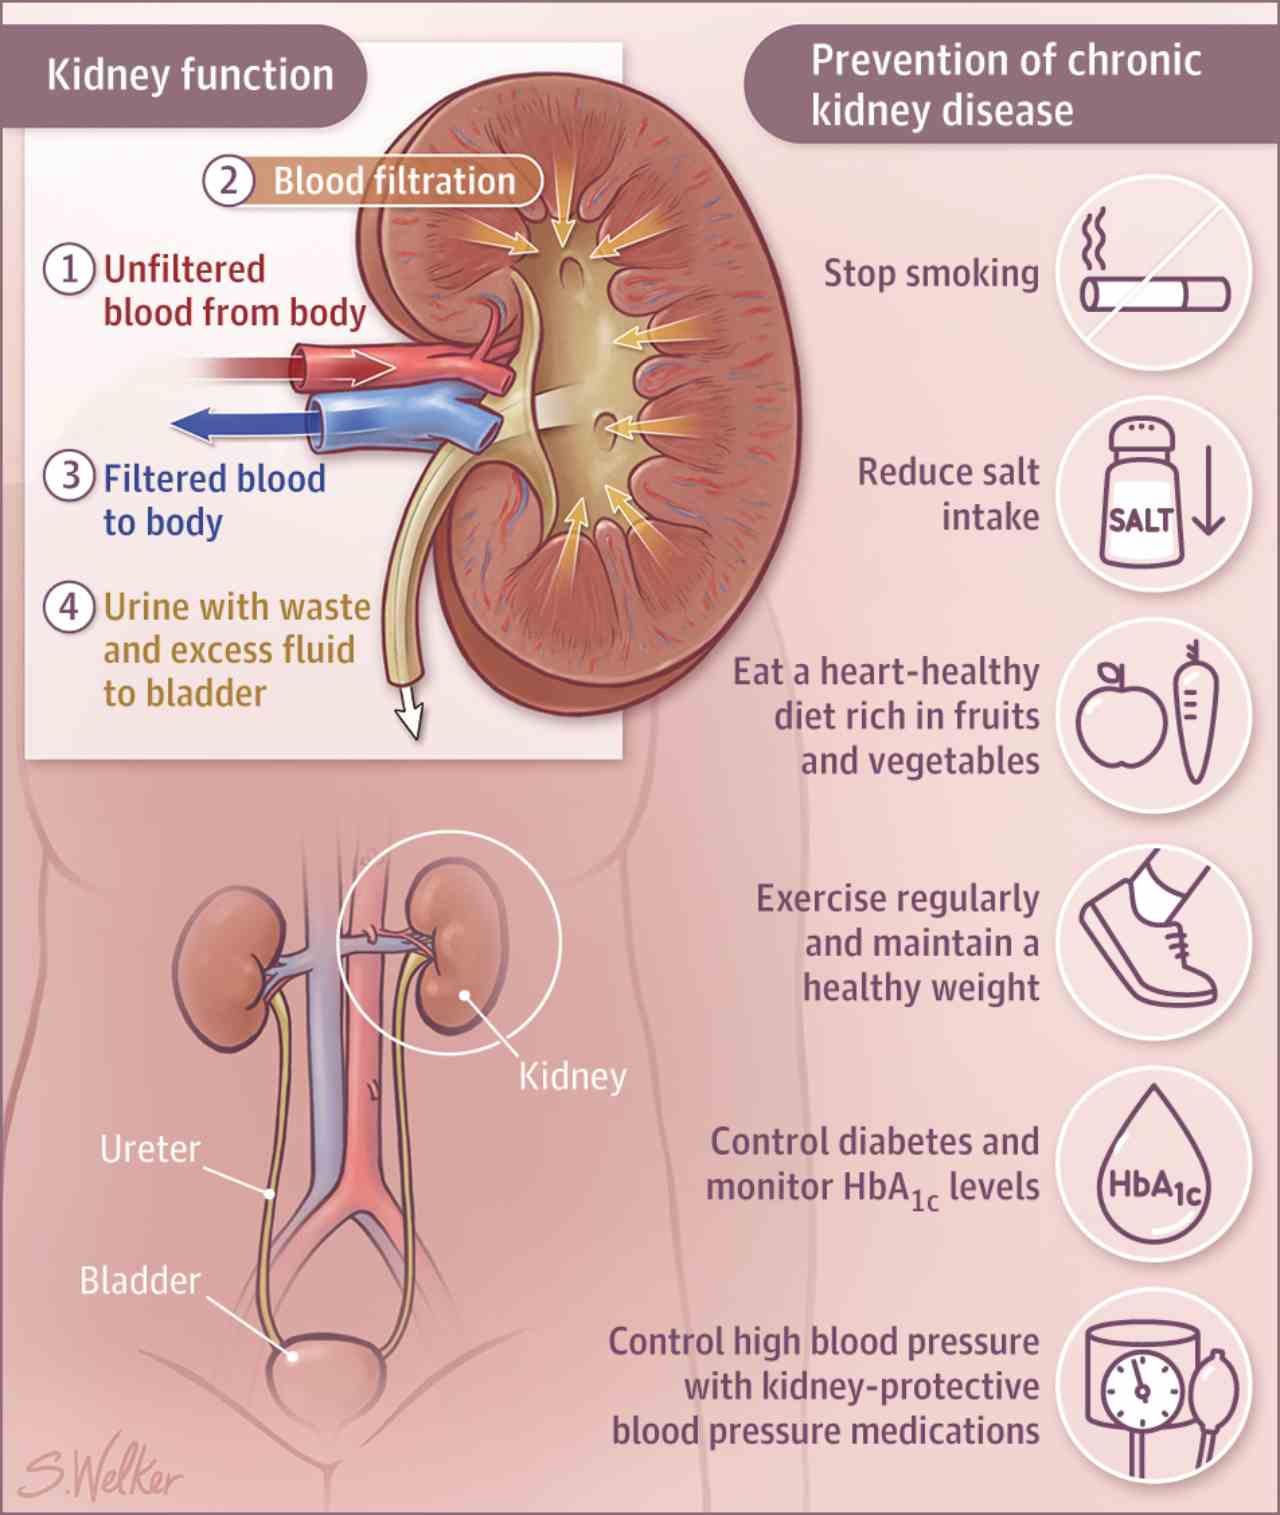 does mobic affect creatinine levels